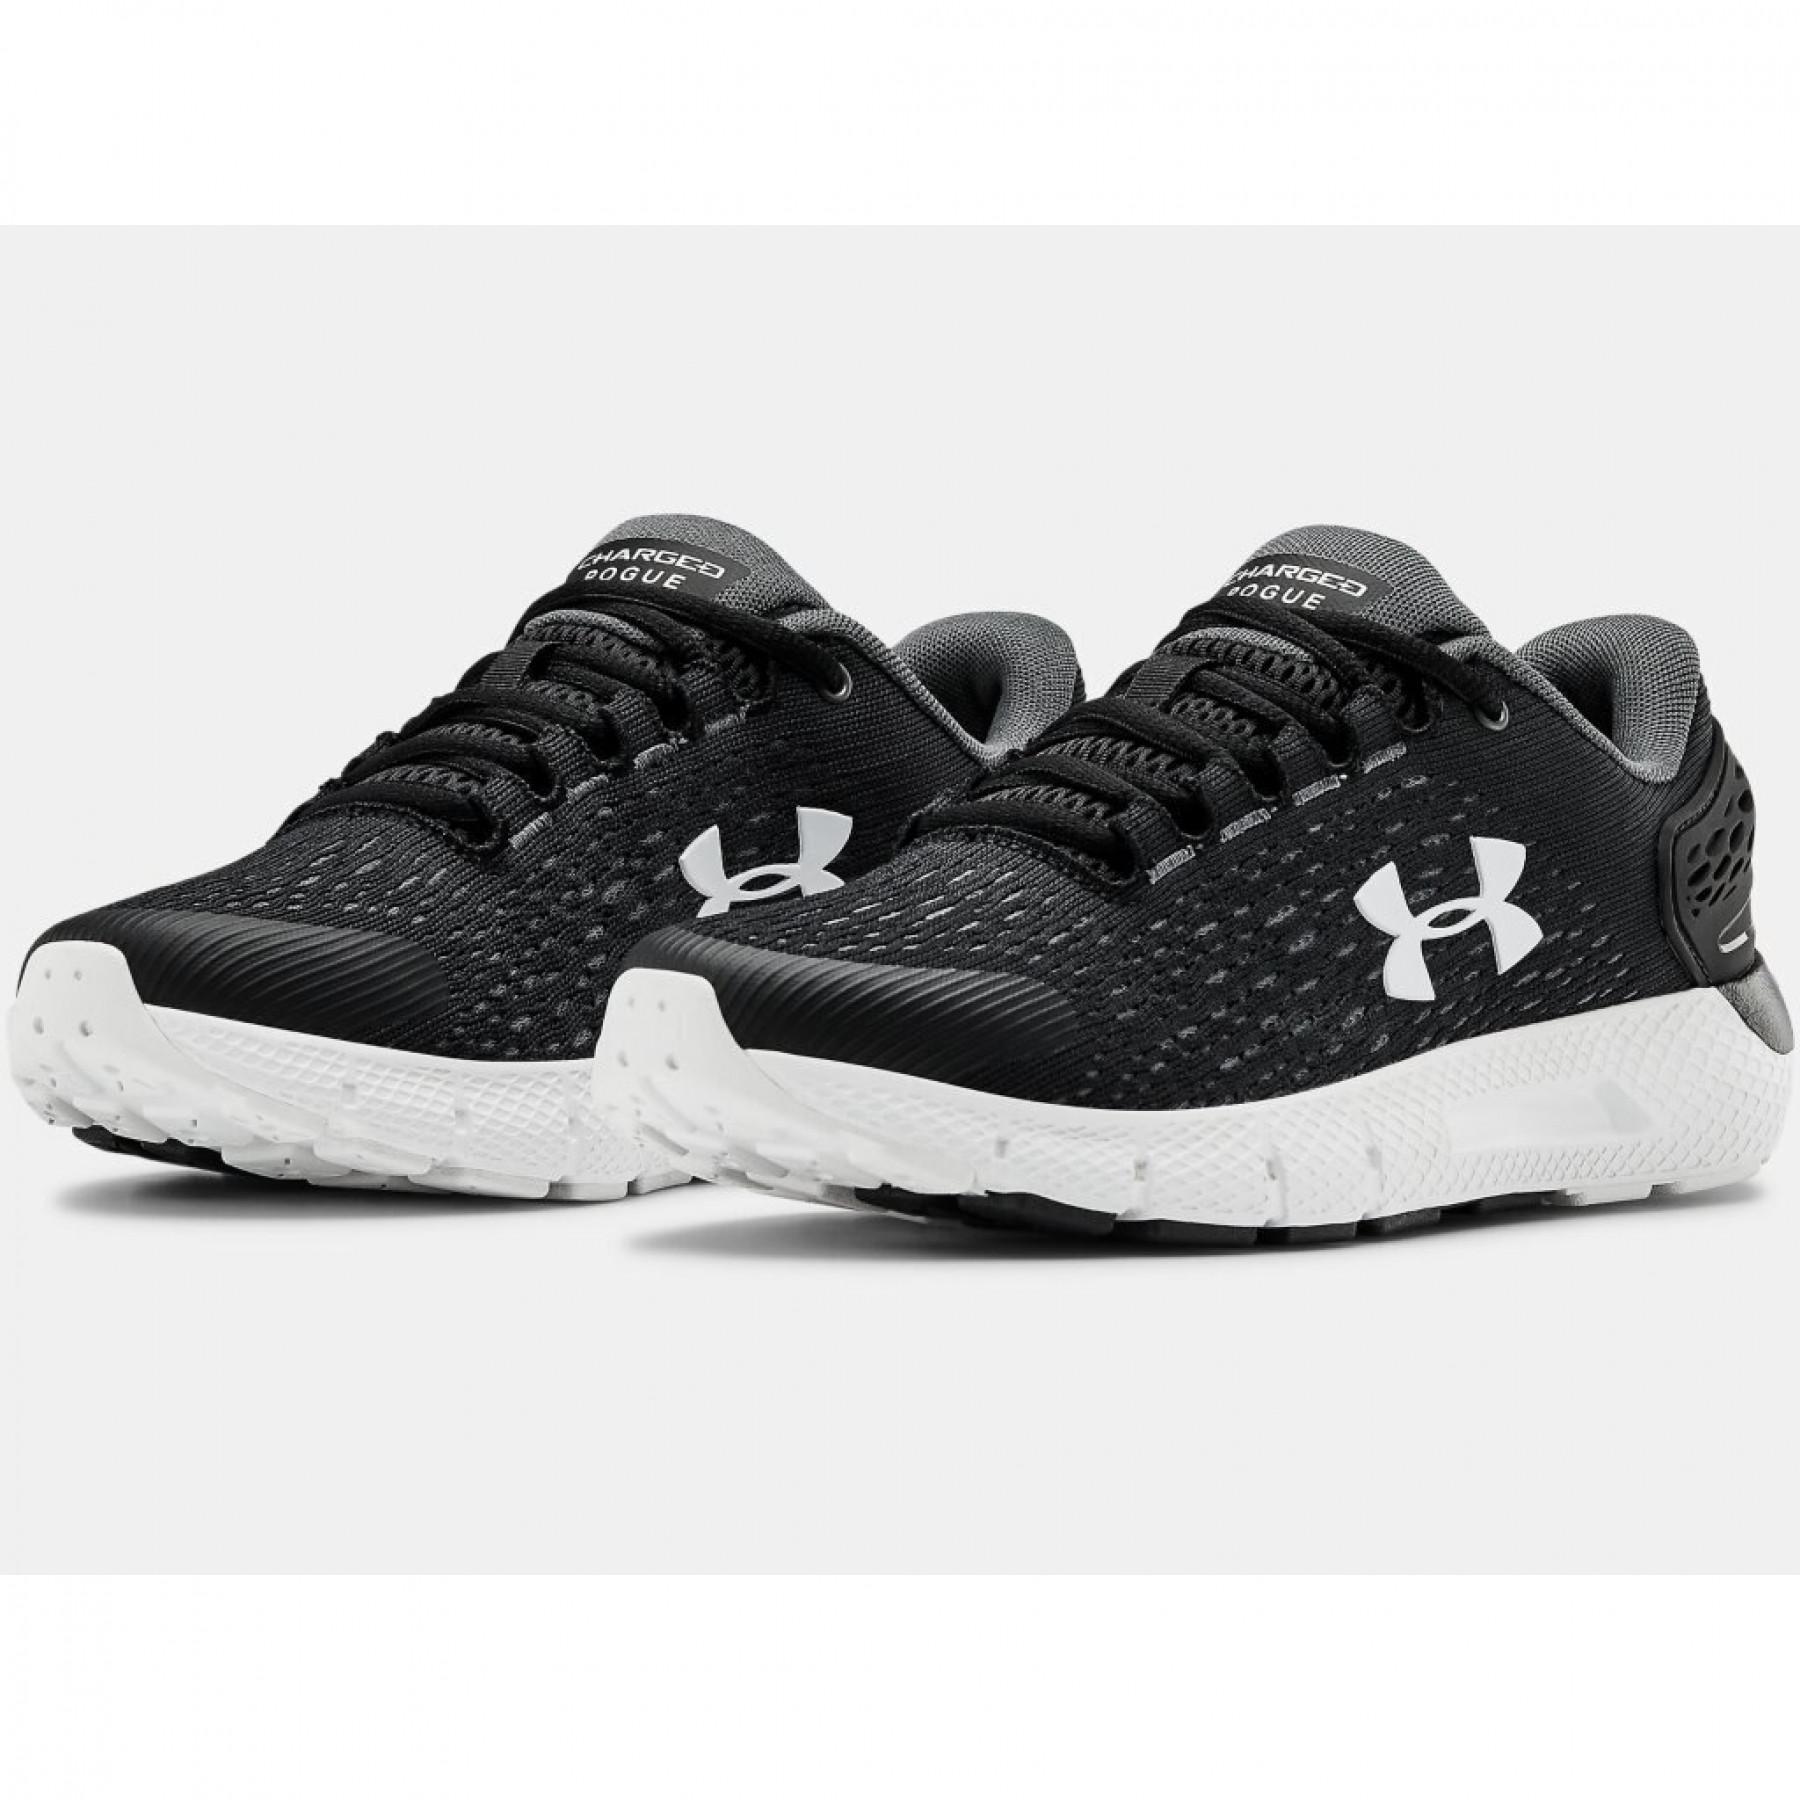 Chaussures de running enfant Under Armour Charged Rogue 2